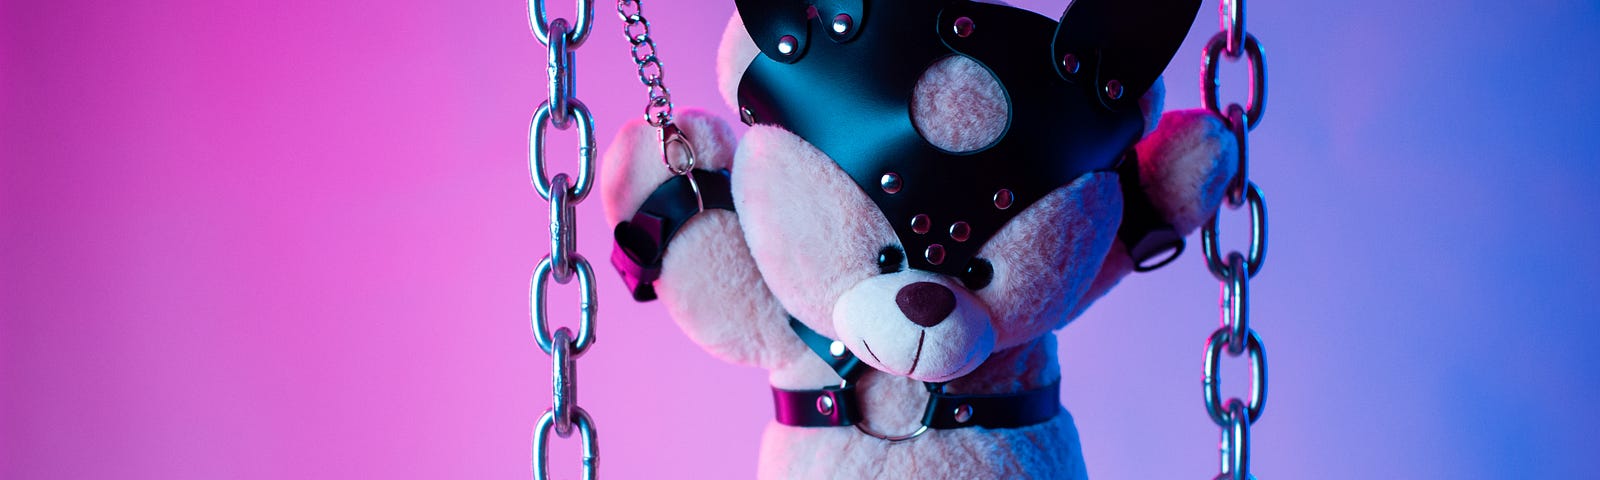 BDSM stuffed bear for an article about kink, love, relationships and sex.